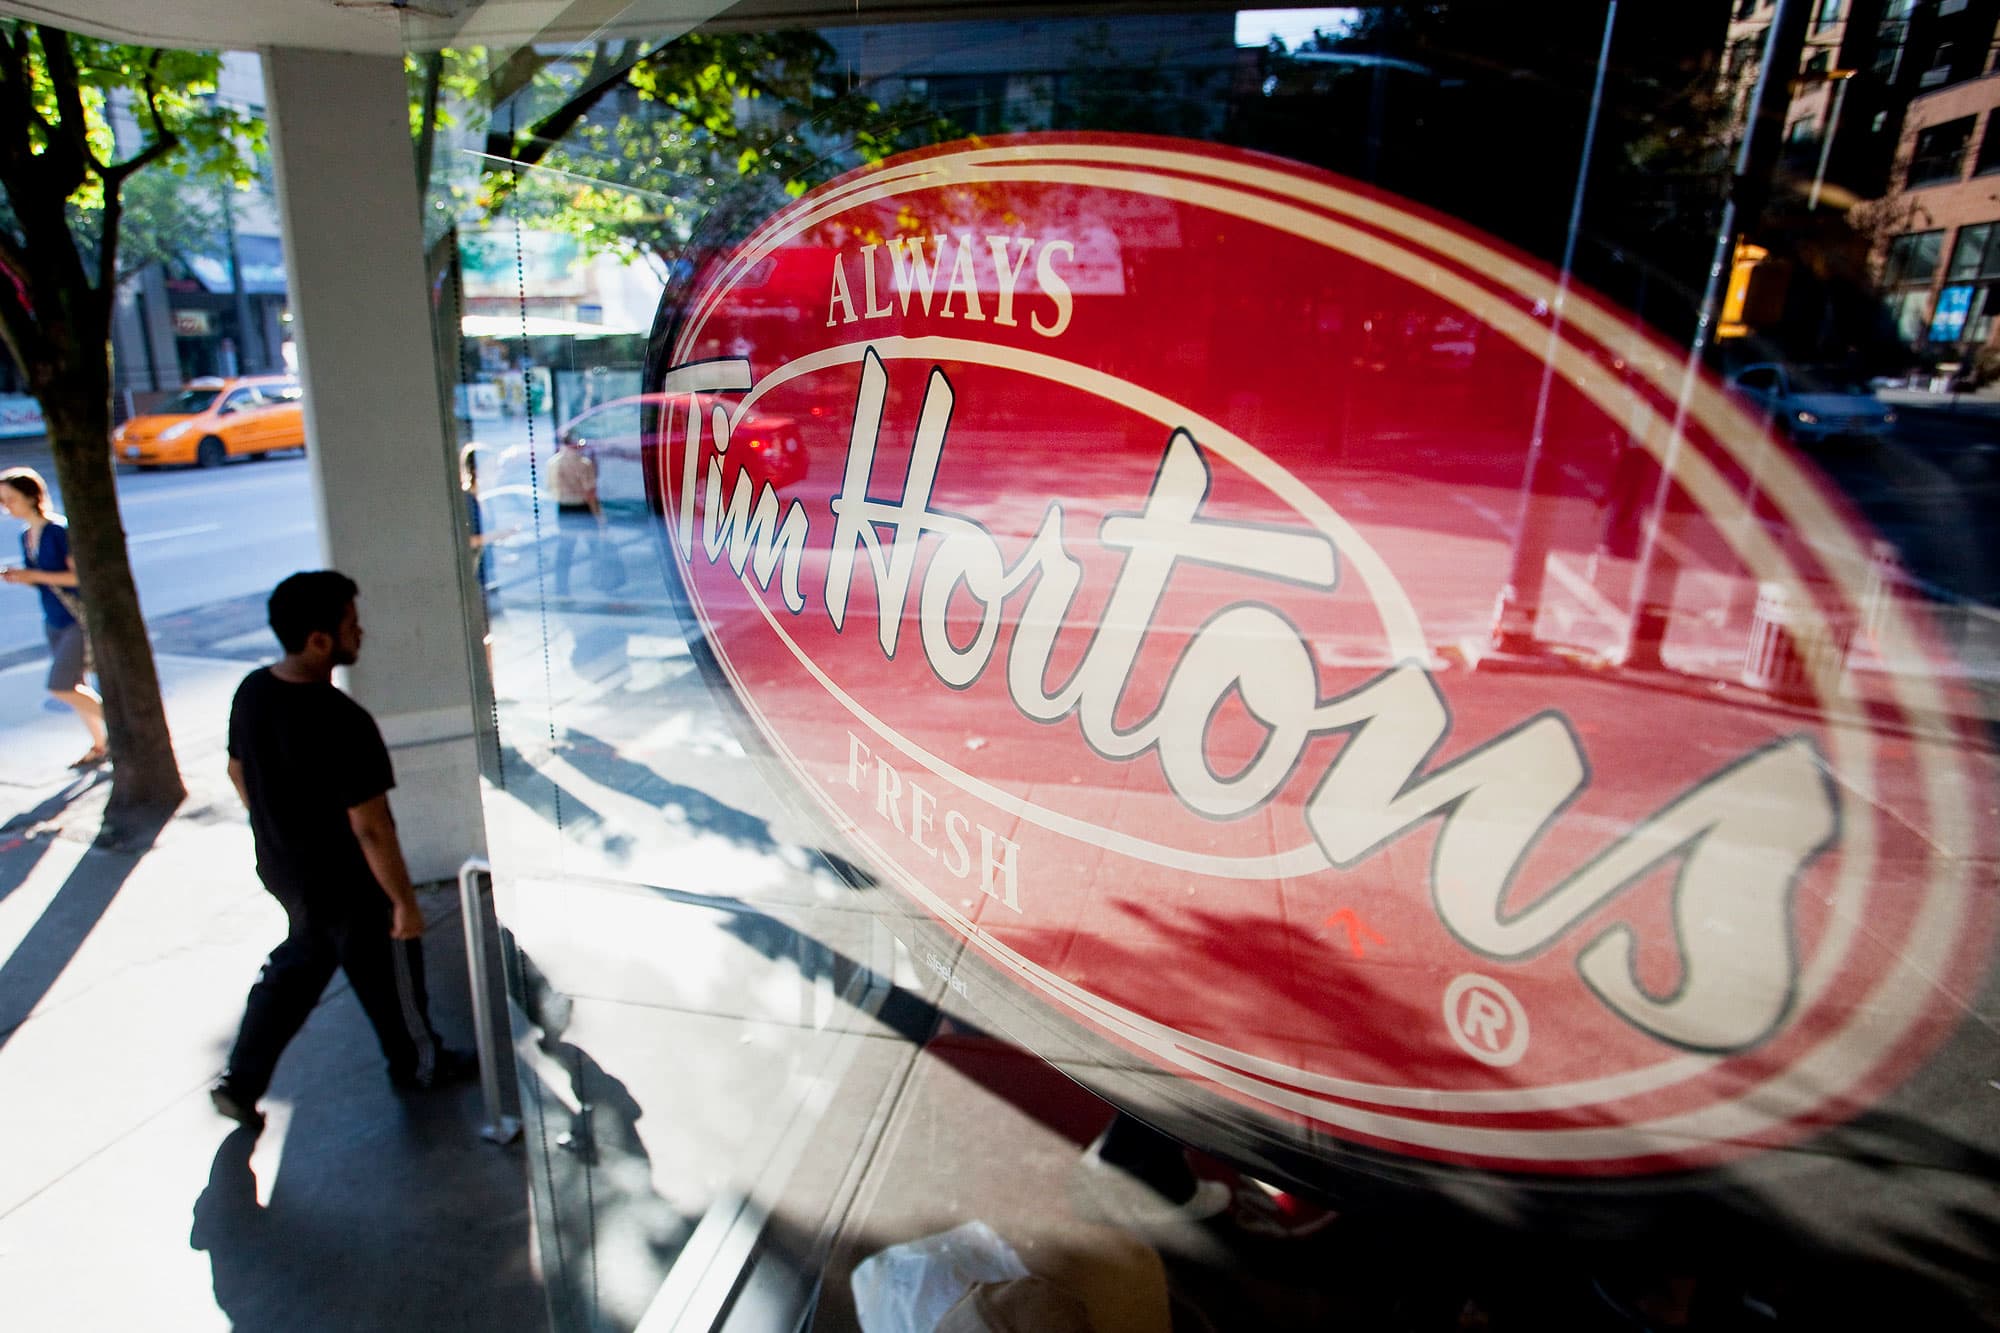 Canadian Covid outbreaks problem Tim Hortons’ turnaround